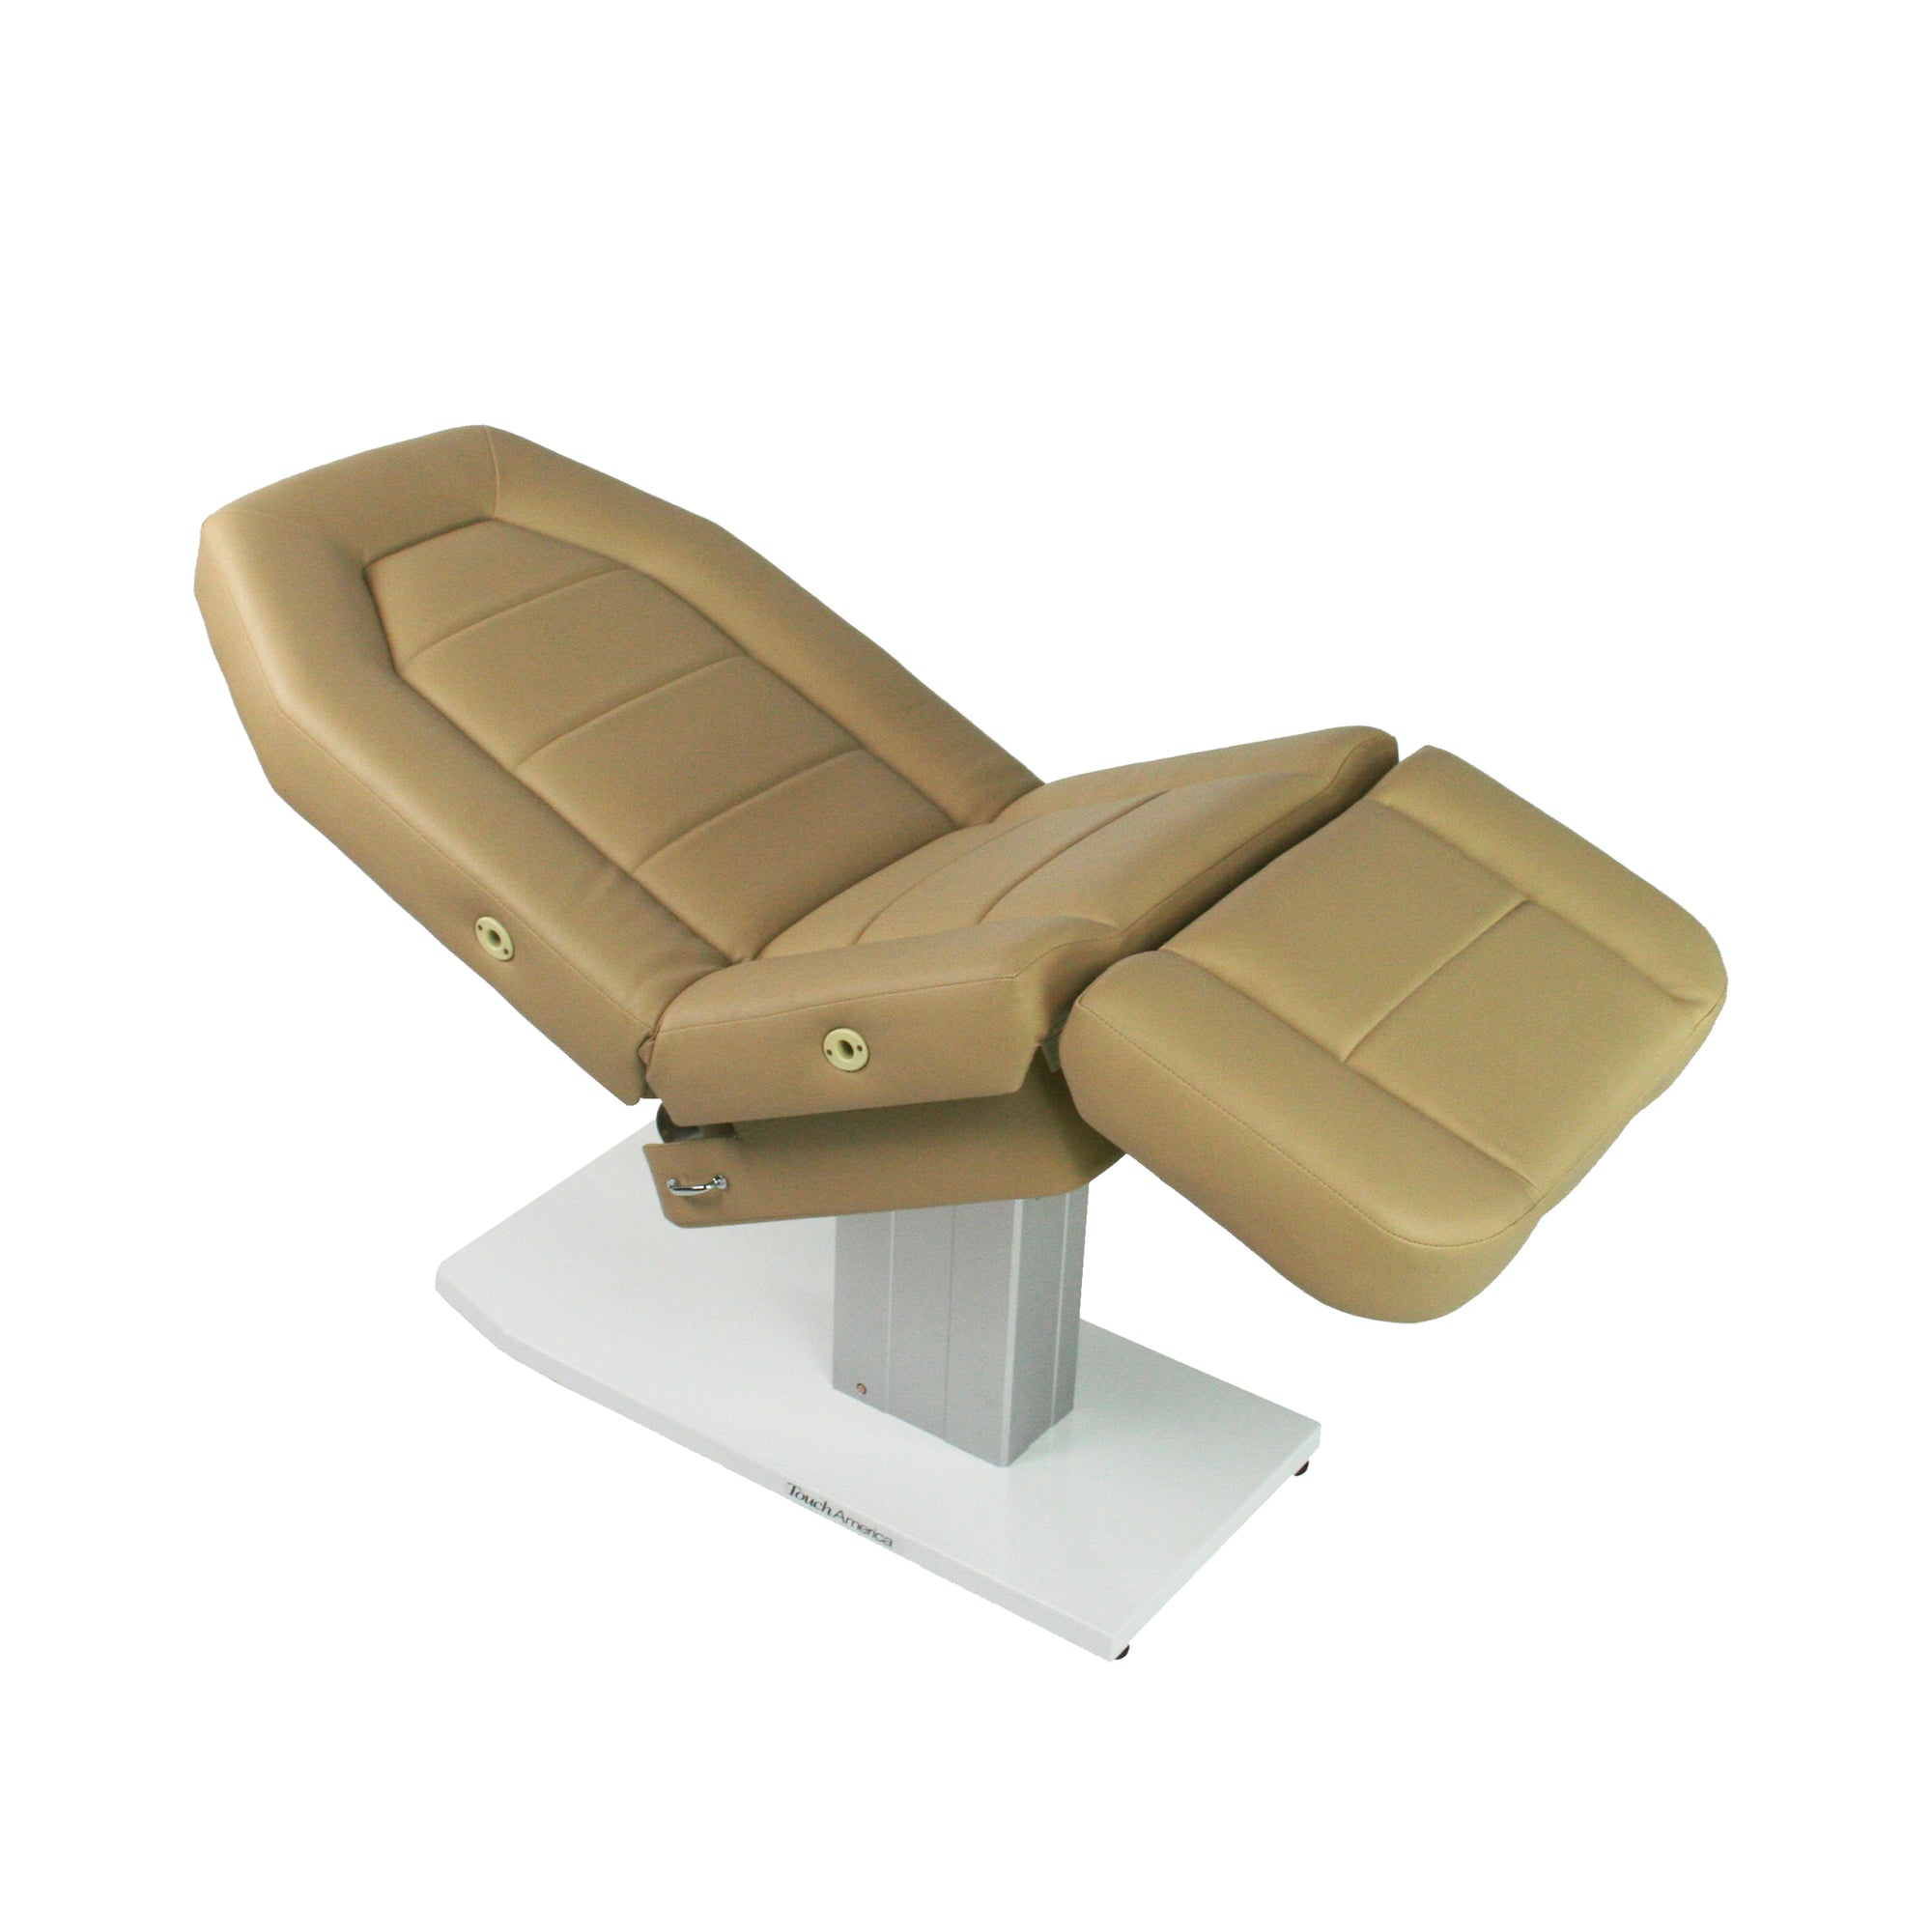 Touch America - Marimba Spa Chair - Superb Massage Tables